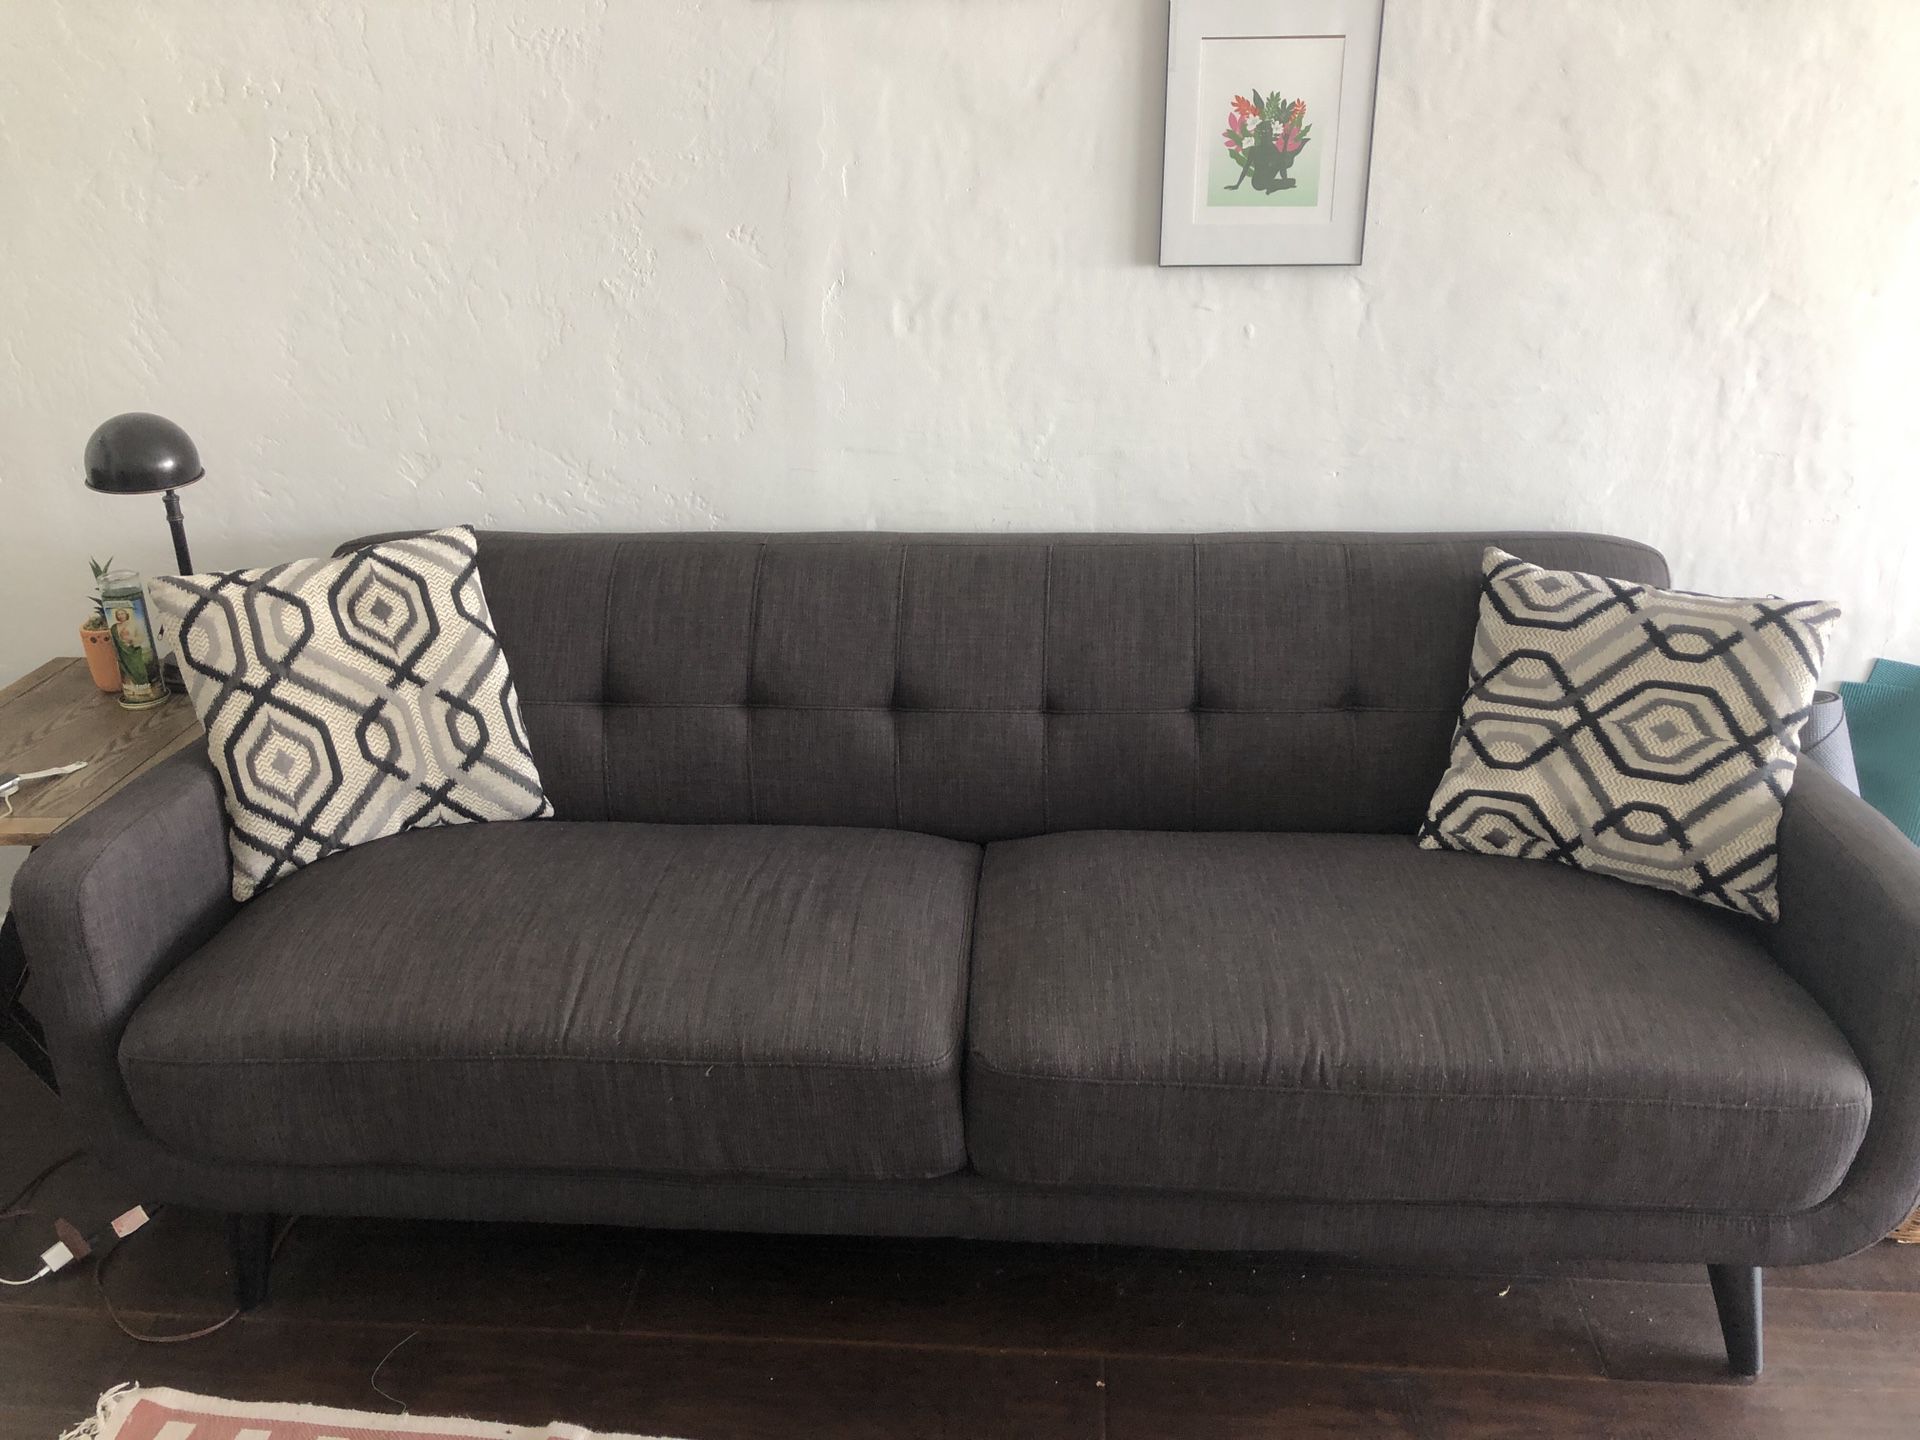 Grey couch with pillows